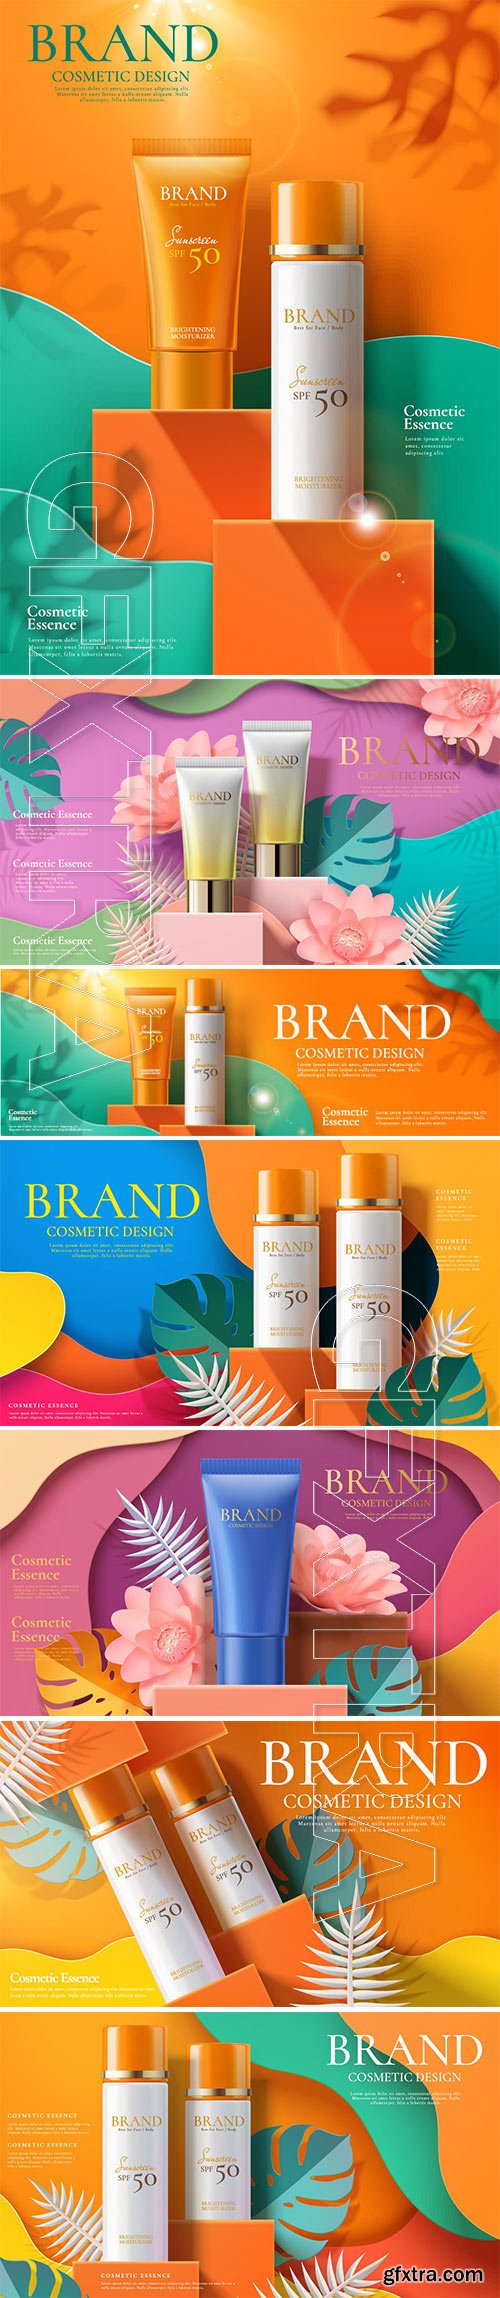 Cosmetic skincare tube and spray ads